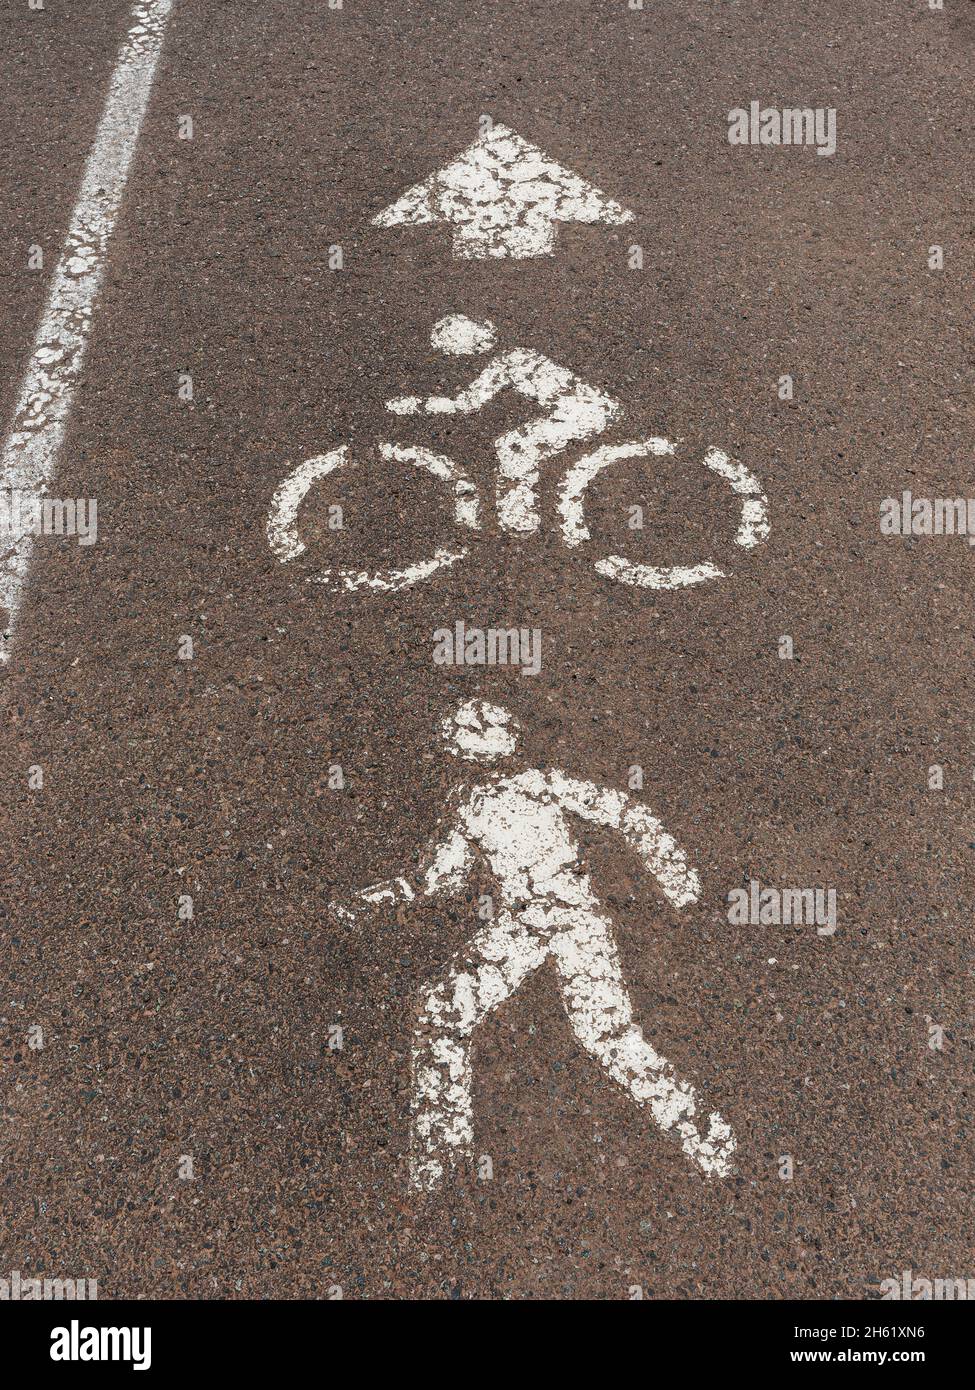 exercise,fitness,paint,pedestrian and bike lane,recreation,road markings,safety,white silhouettes Stock Photo